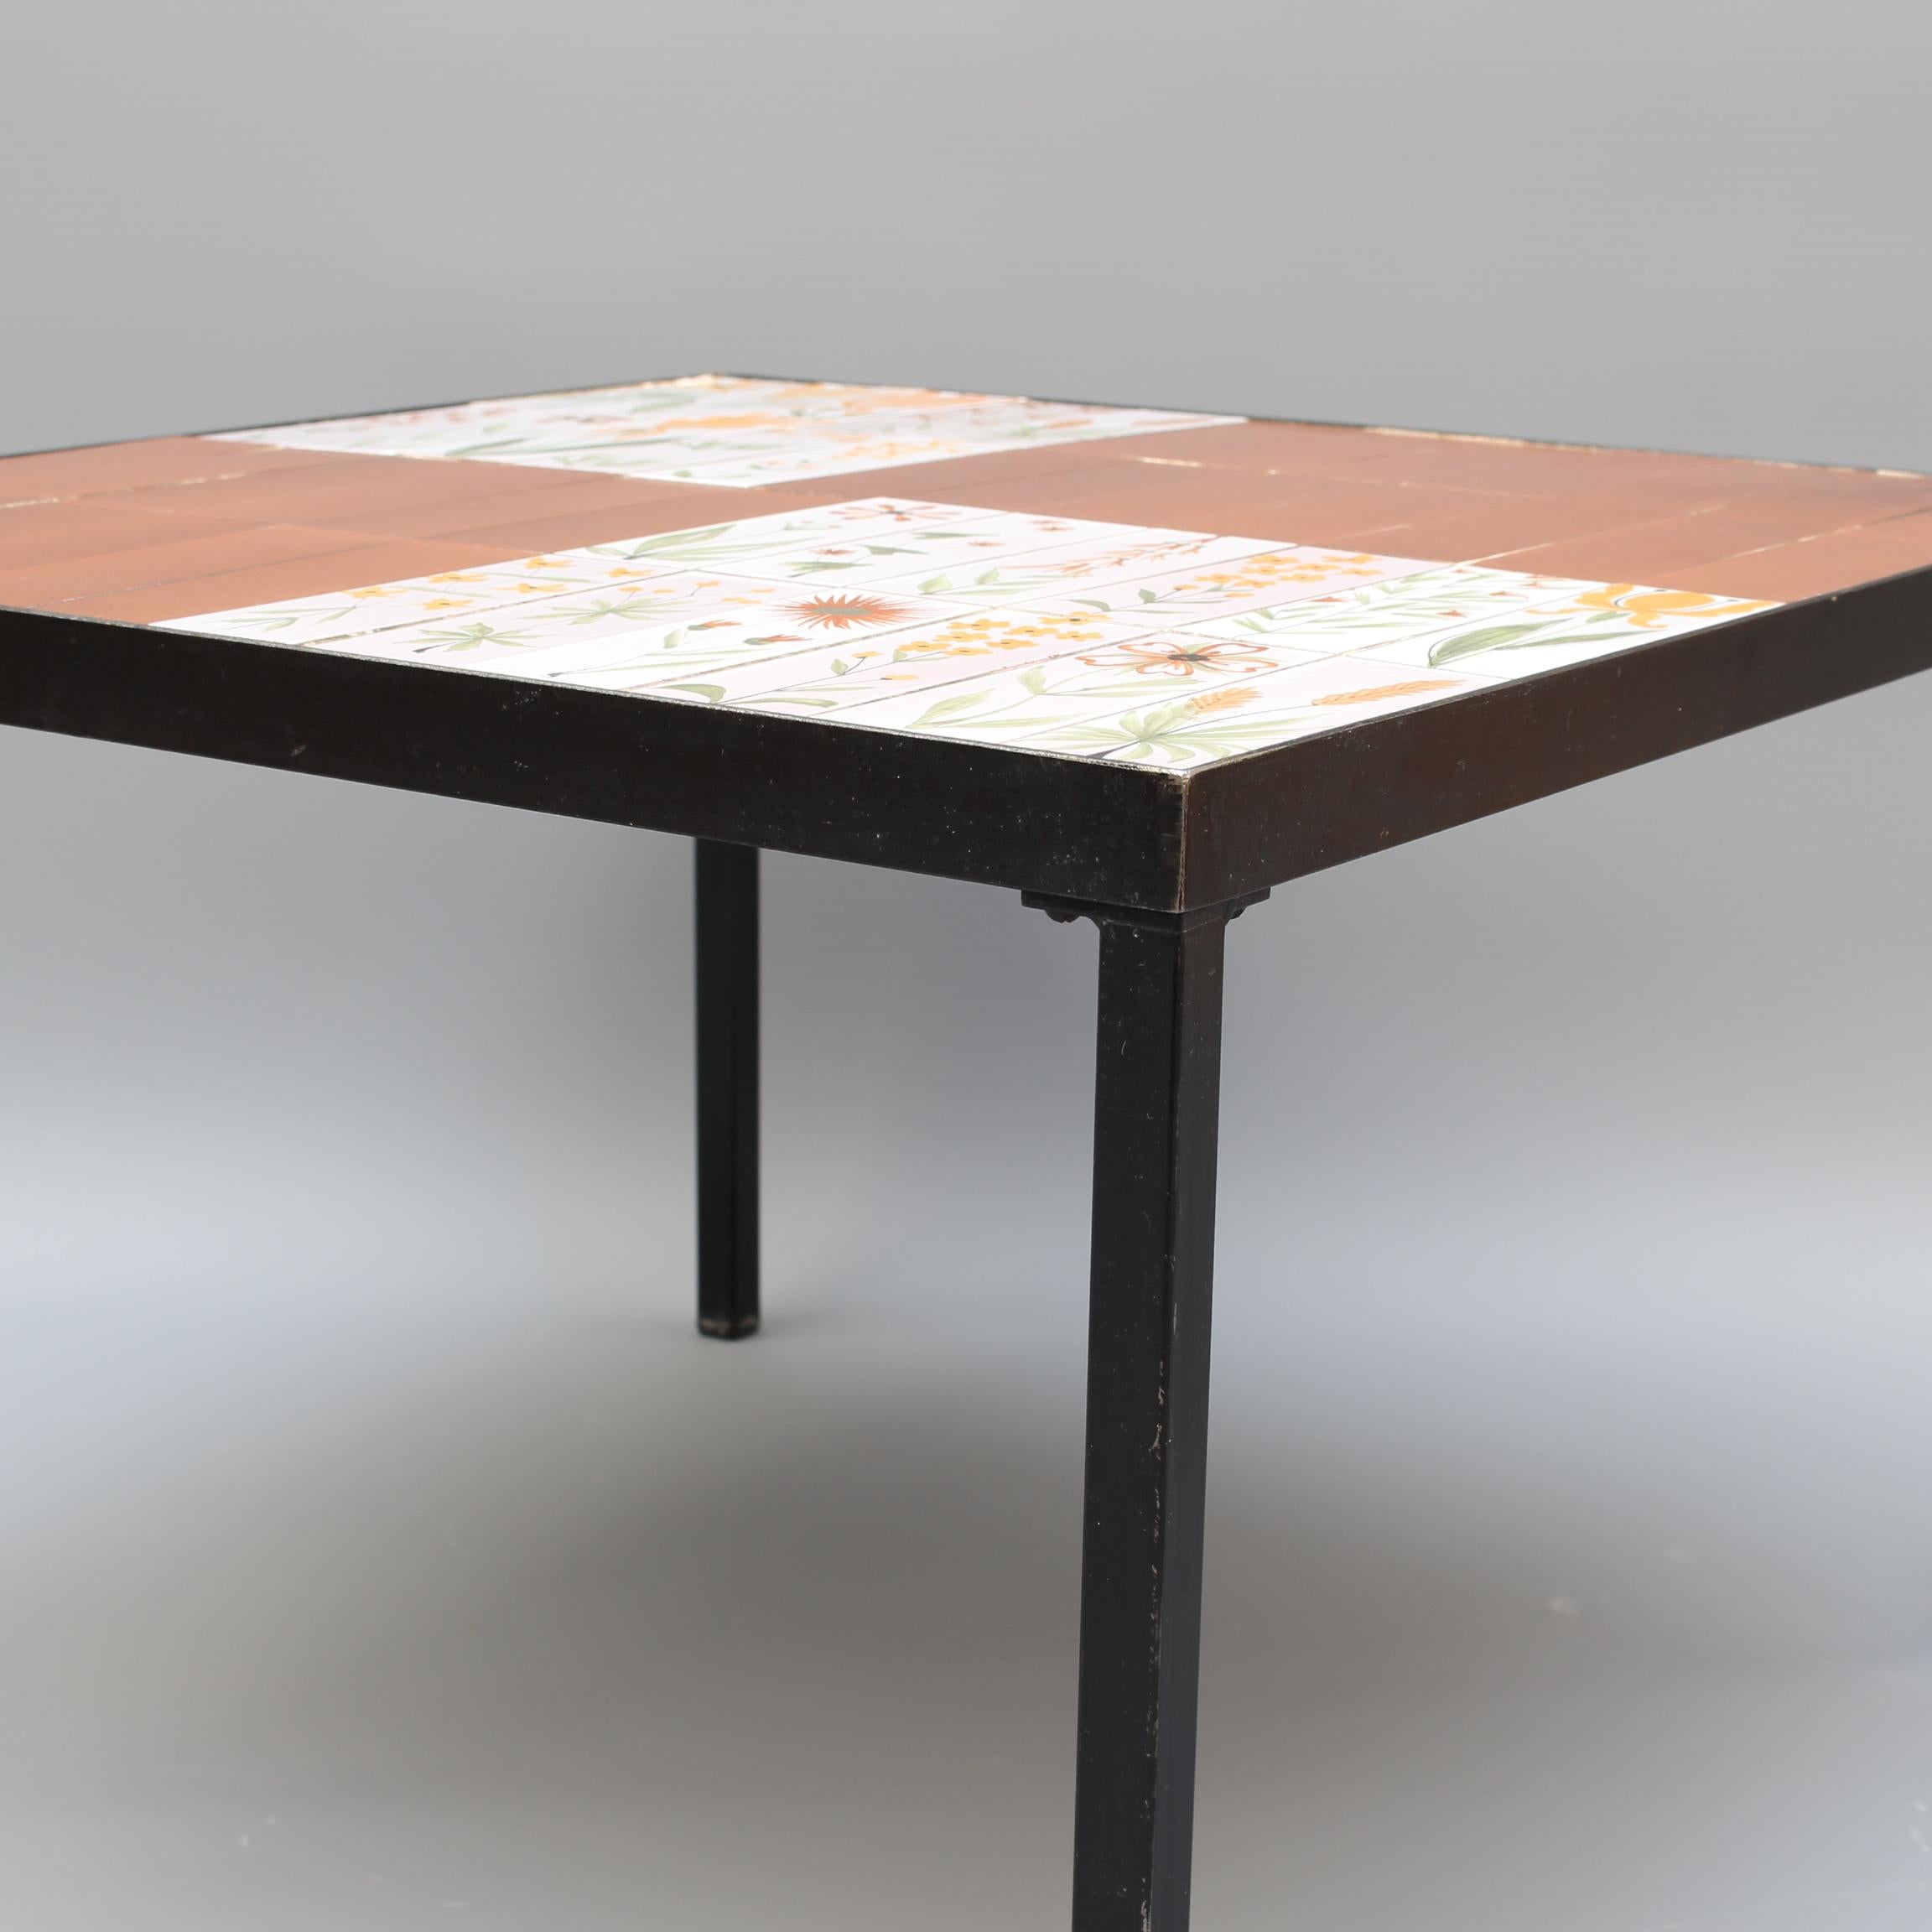 Mid-Century Modern Coffee Table with Decorative Ceramic Tiles by Roger Capron, circa 1970s For Sale